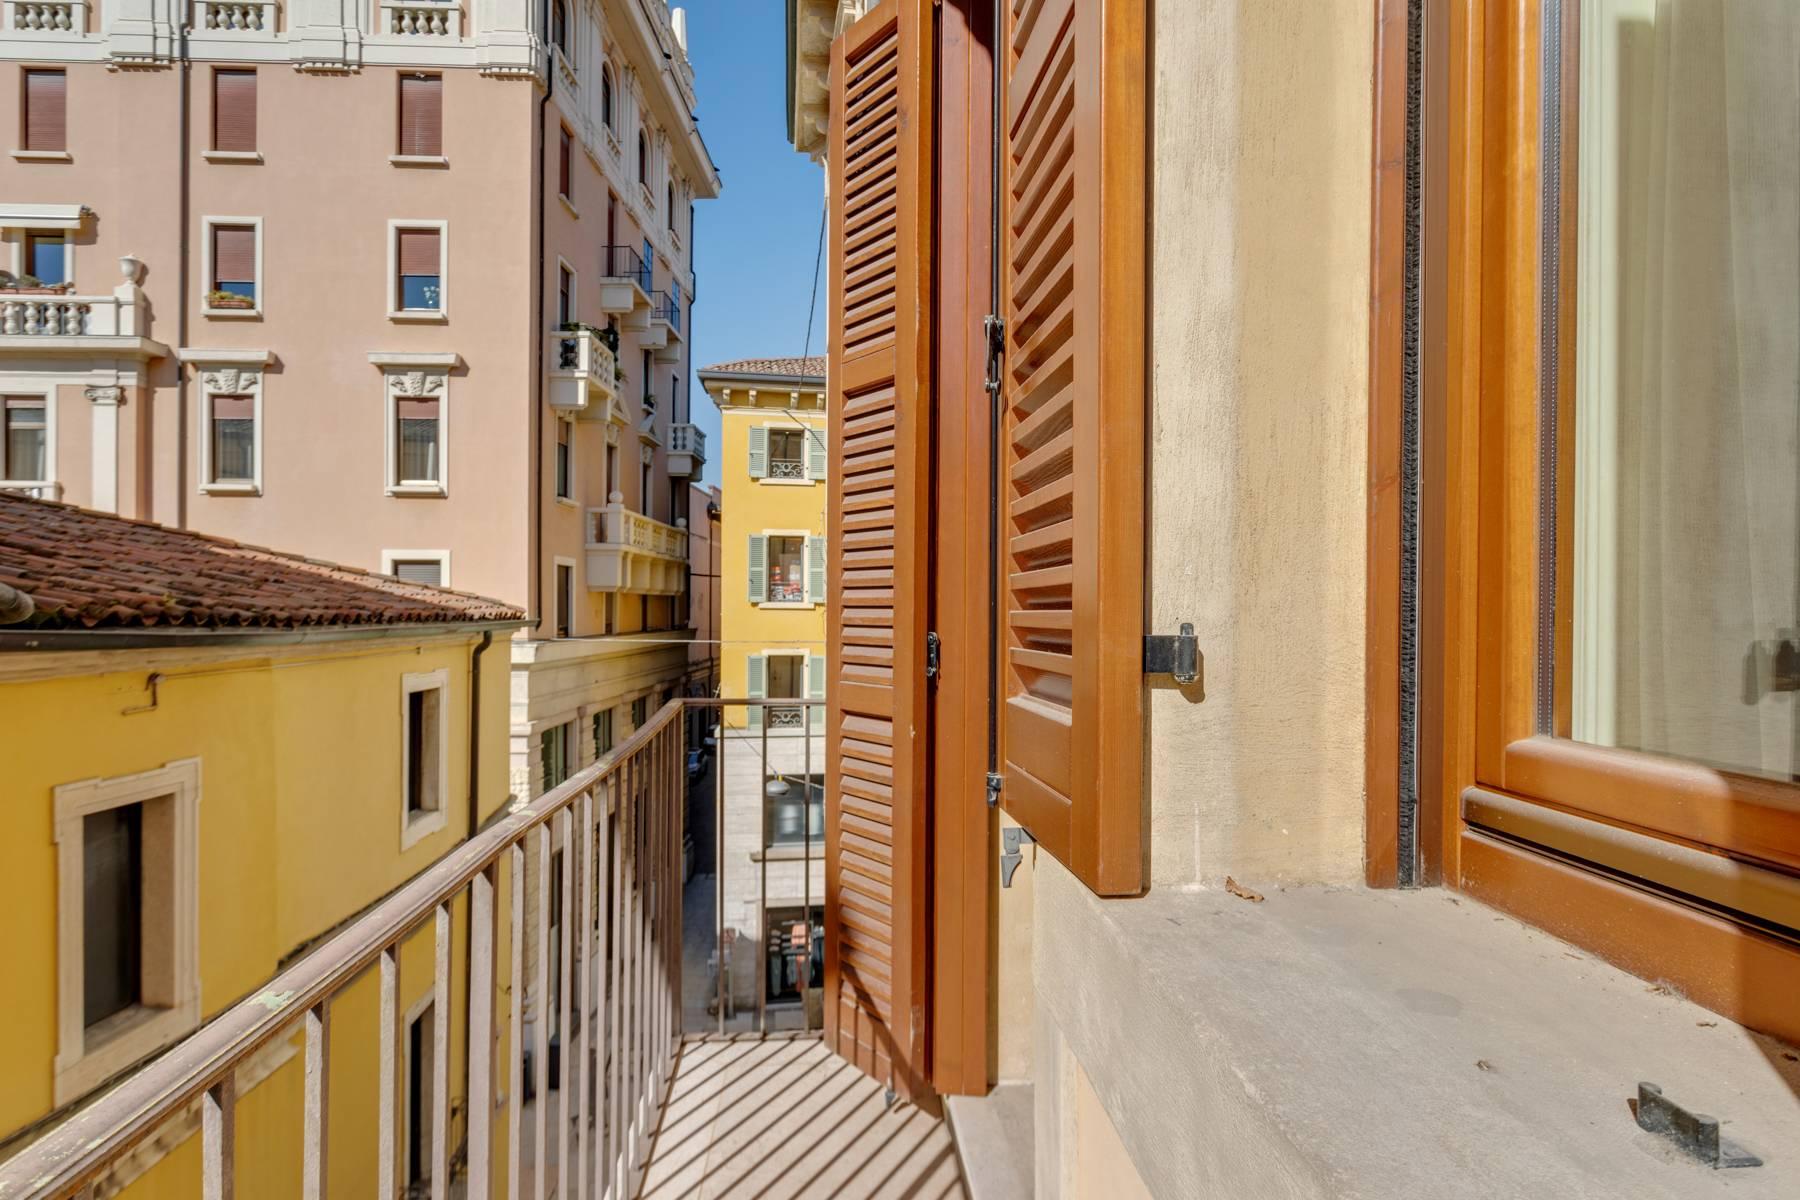 Exquisite apartment just few steps away from Piazza delle Erbe - 9